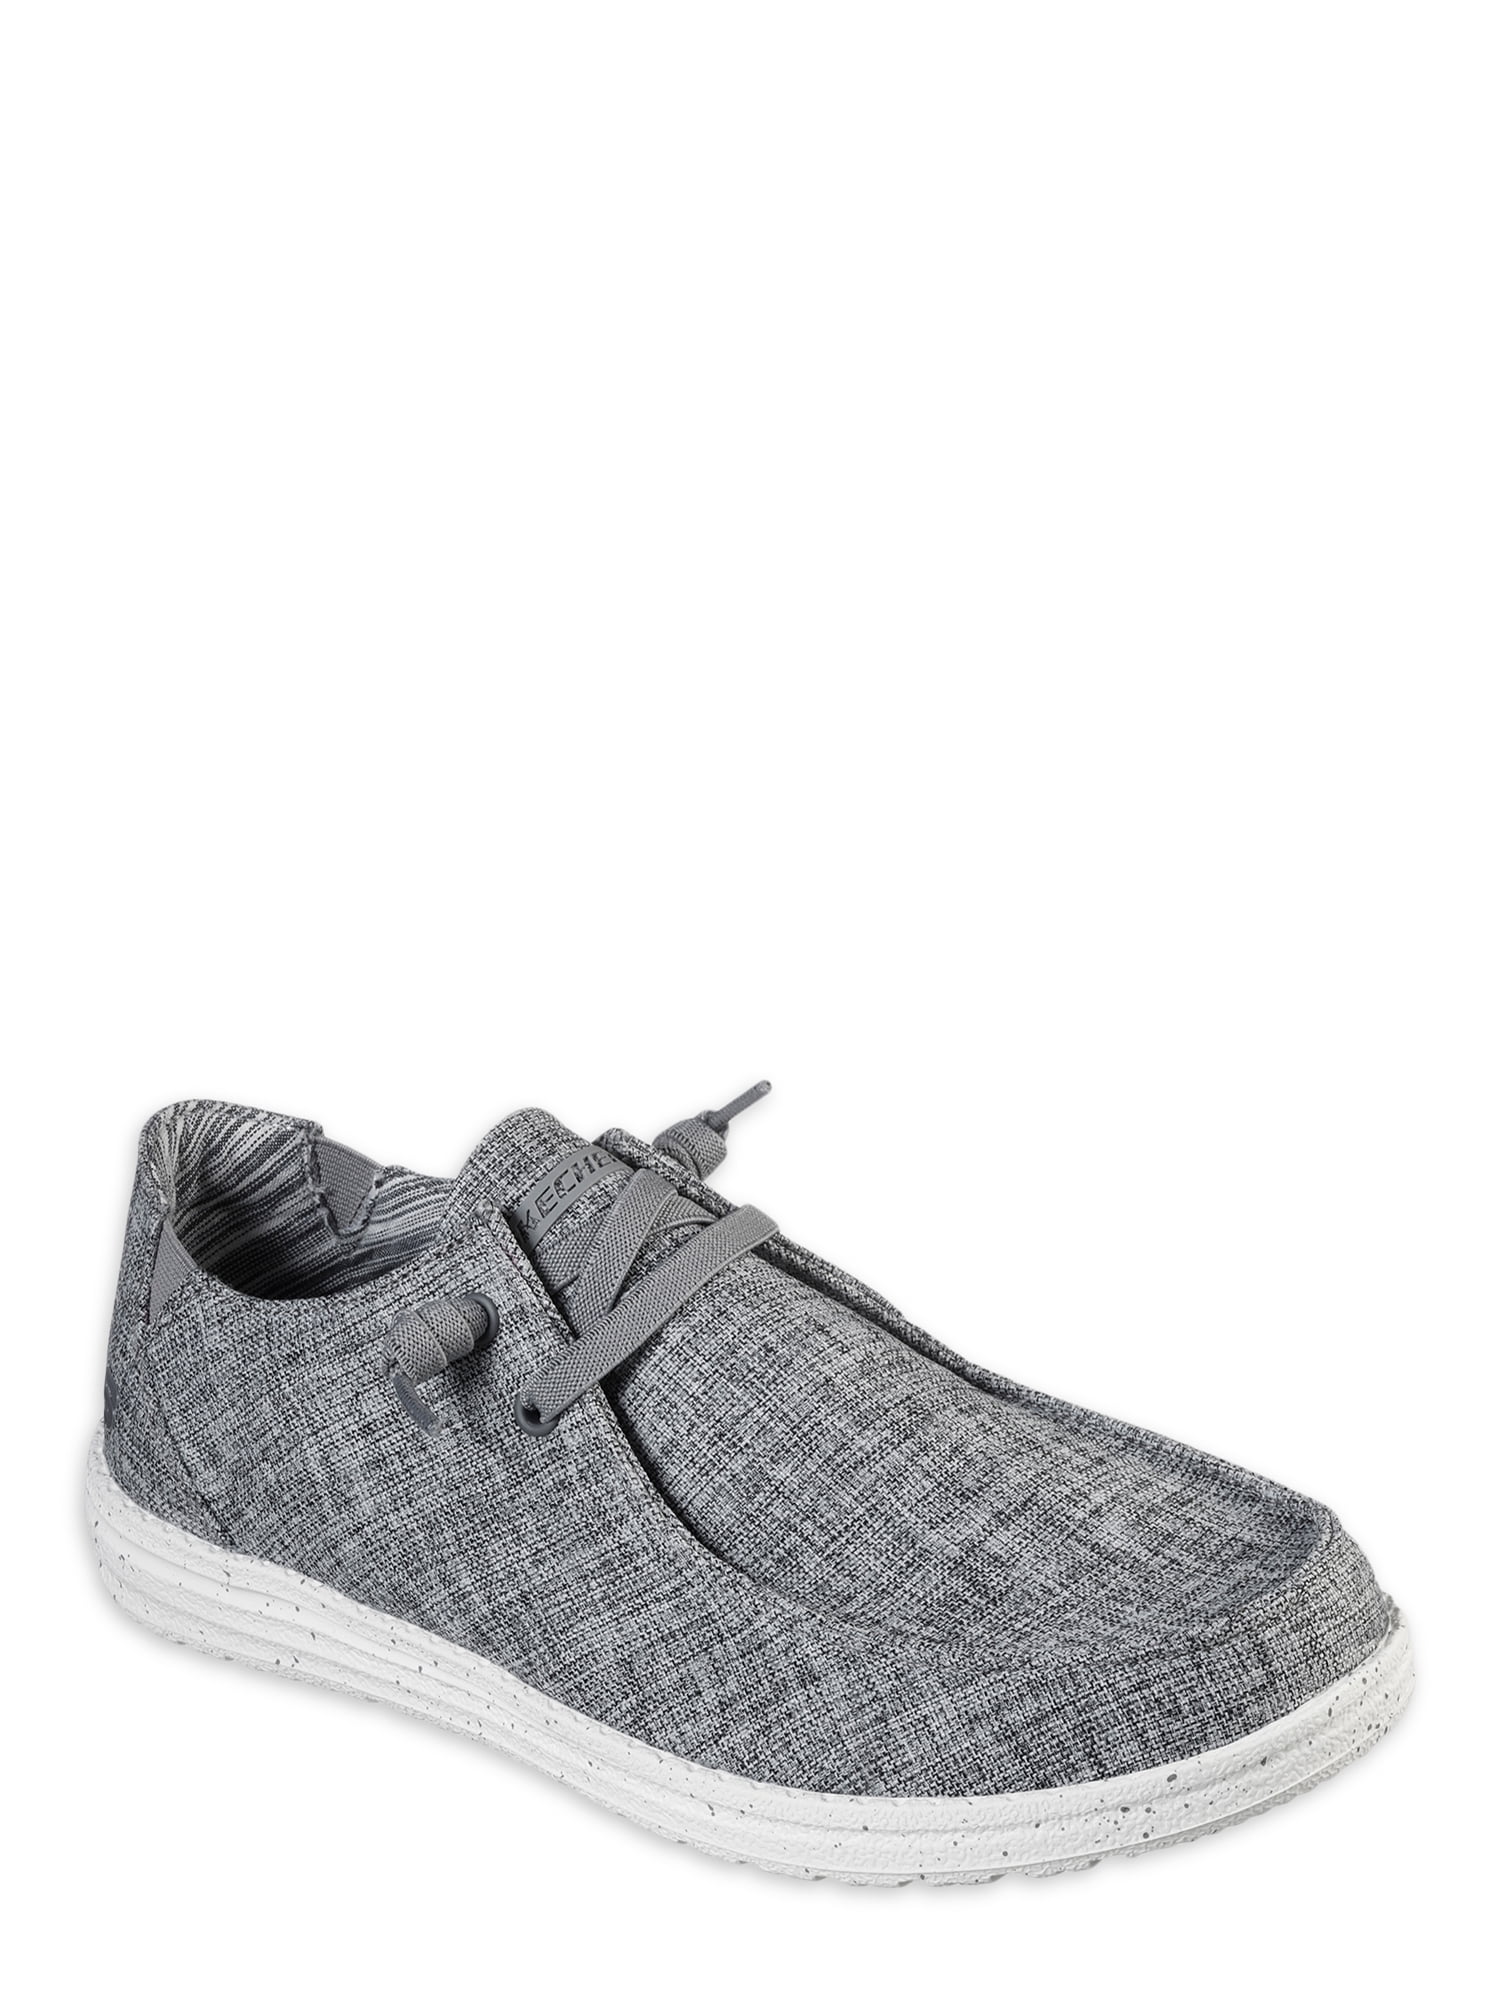 Skechers Men's Melson Chad Relaxed Fit Bungee Lace Slip-On - Walmart.com